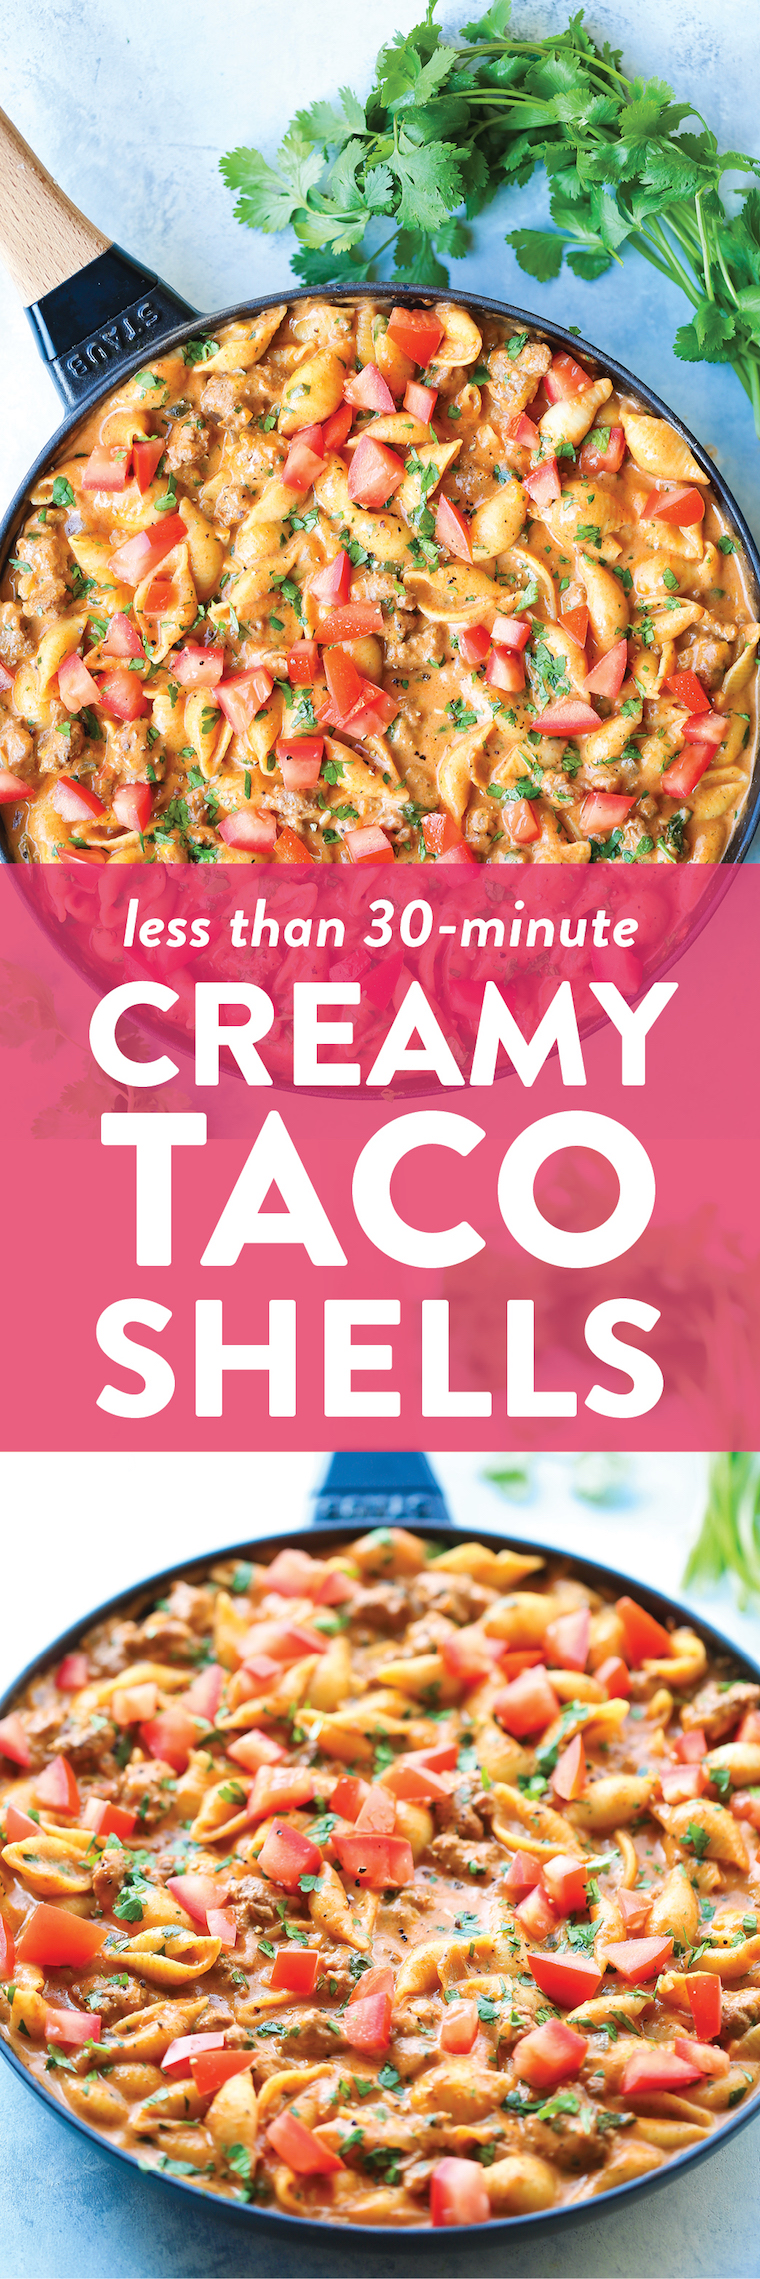 Creamy Taco Shells - My favorite 30-min weeknight meal! Made with hamburger meat and everyone's favorite taco flavor goodness. Everyone will LOVE THIS!